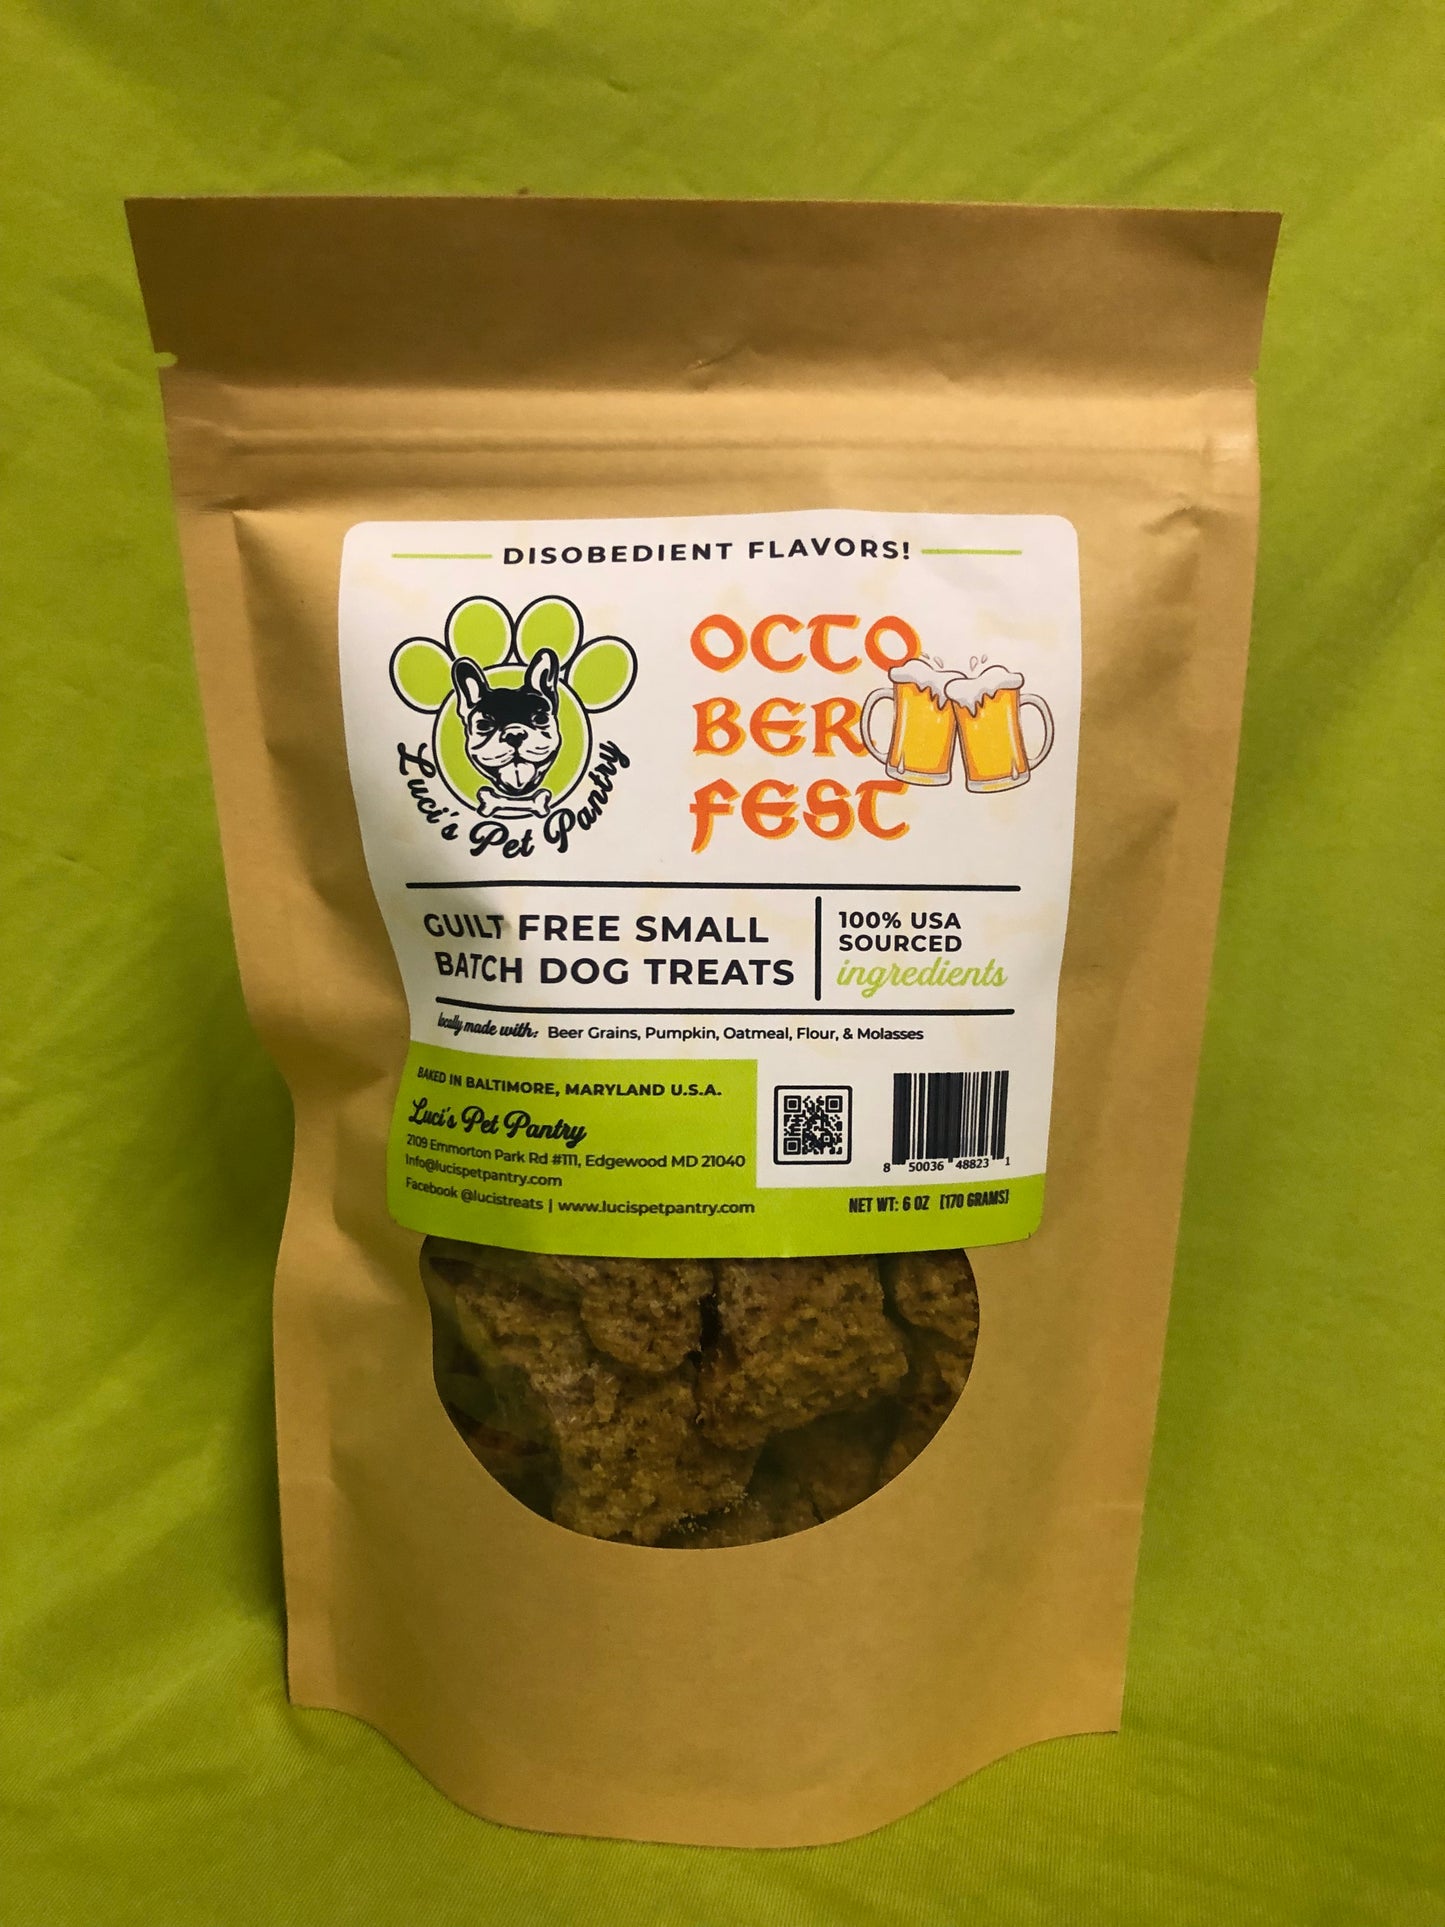 Pizza & Beer - All Natural Dog & Puppy Treats - Disobedient Biscuits! 6 oz. Pouch